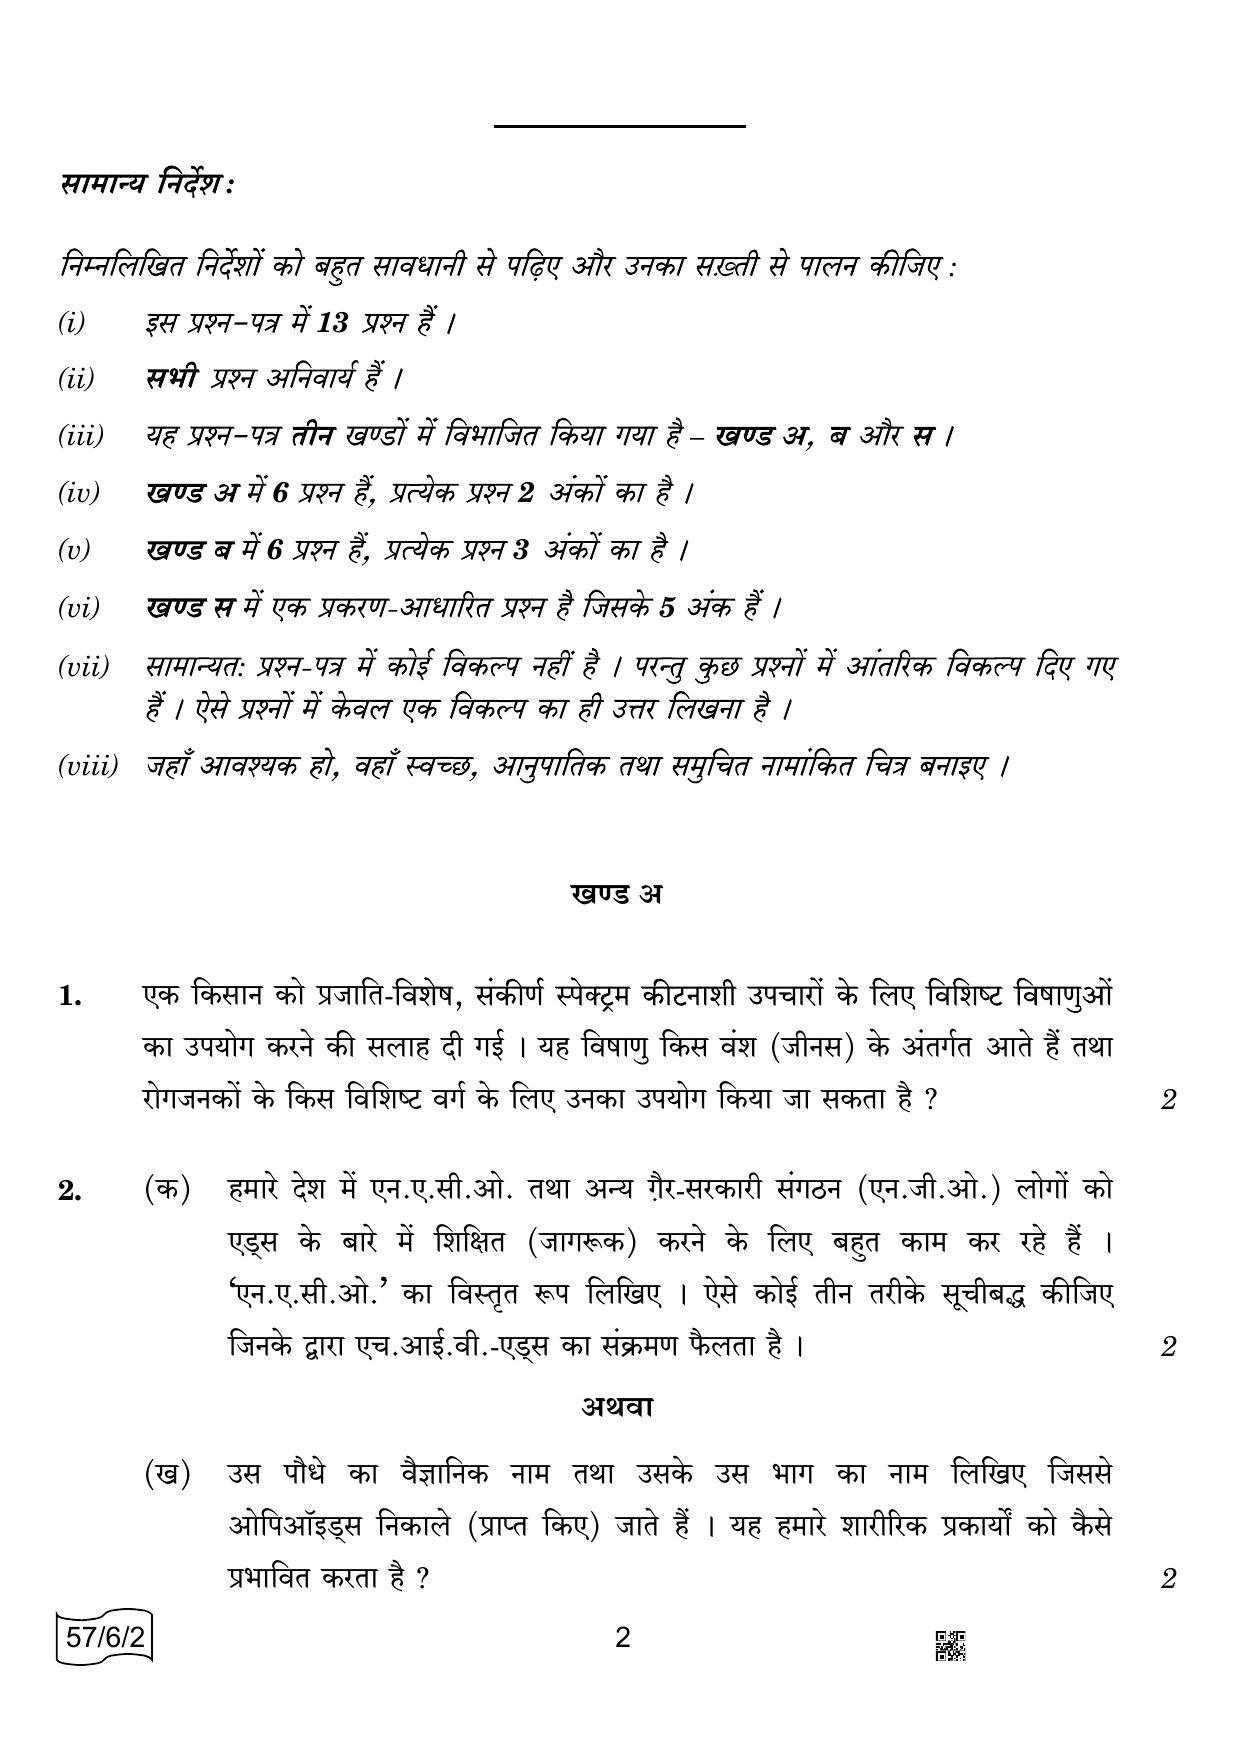 CBSE Class 12 57-6-2 BIOLOGY 2022 Compartment Question Paper - Page 2